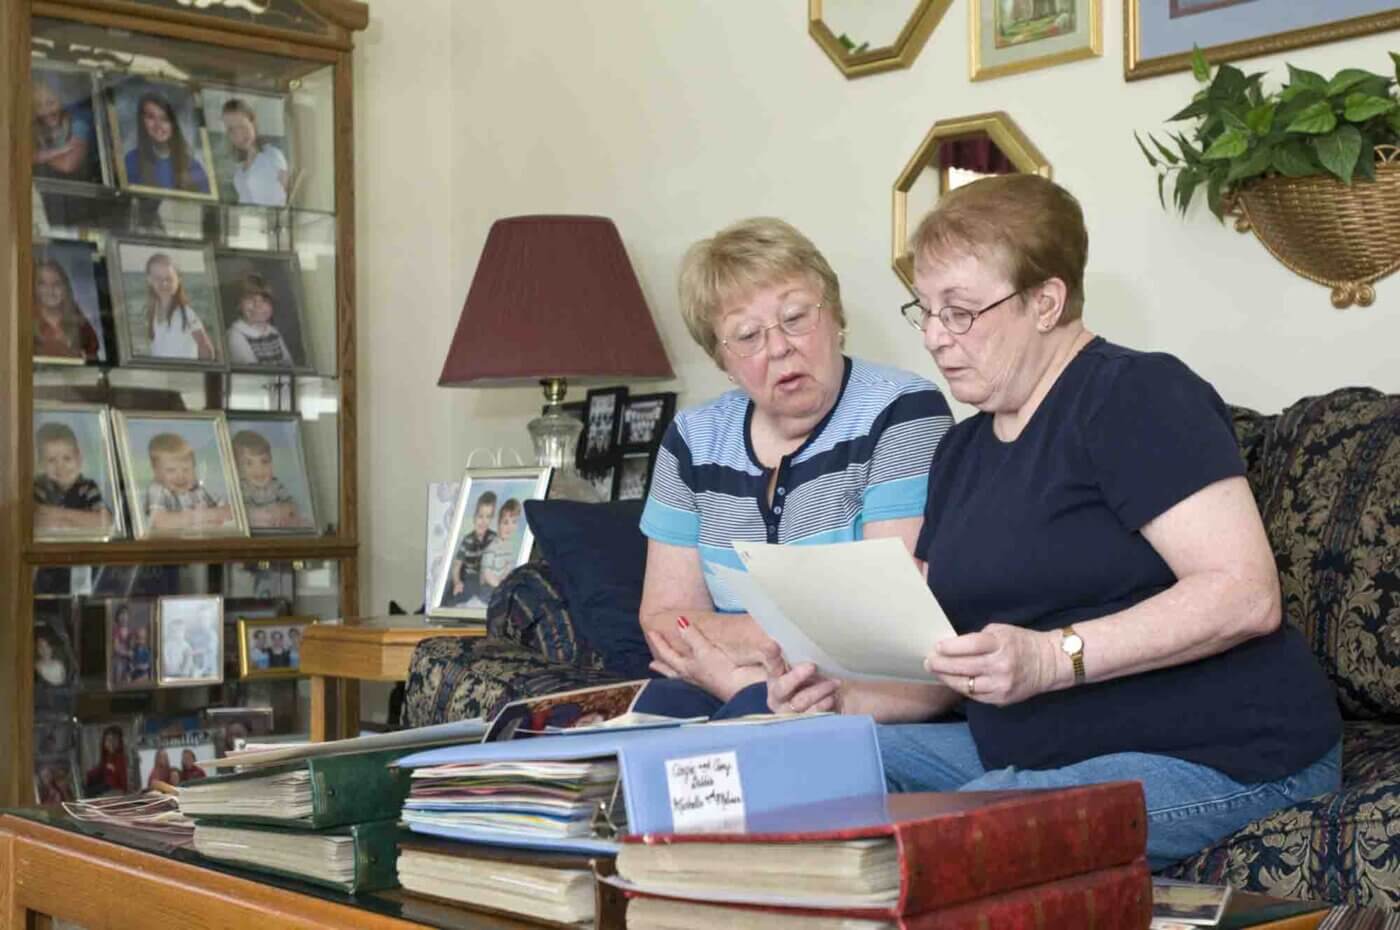 For Louisville Magazine: Fraternal twins Janice Mingus, left, and Judy Ernst look through photos of their twins through the years as participants in a UL twin study Friday, June 21, 2012 in Louisville, Ky.